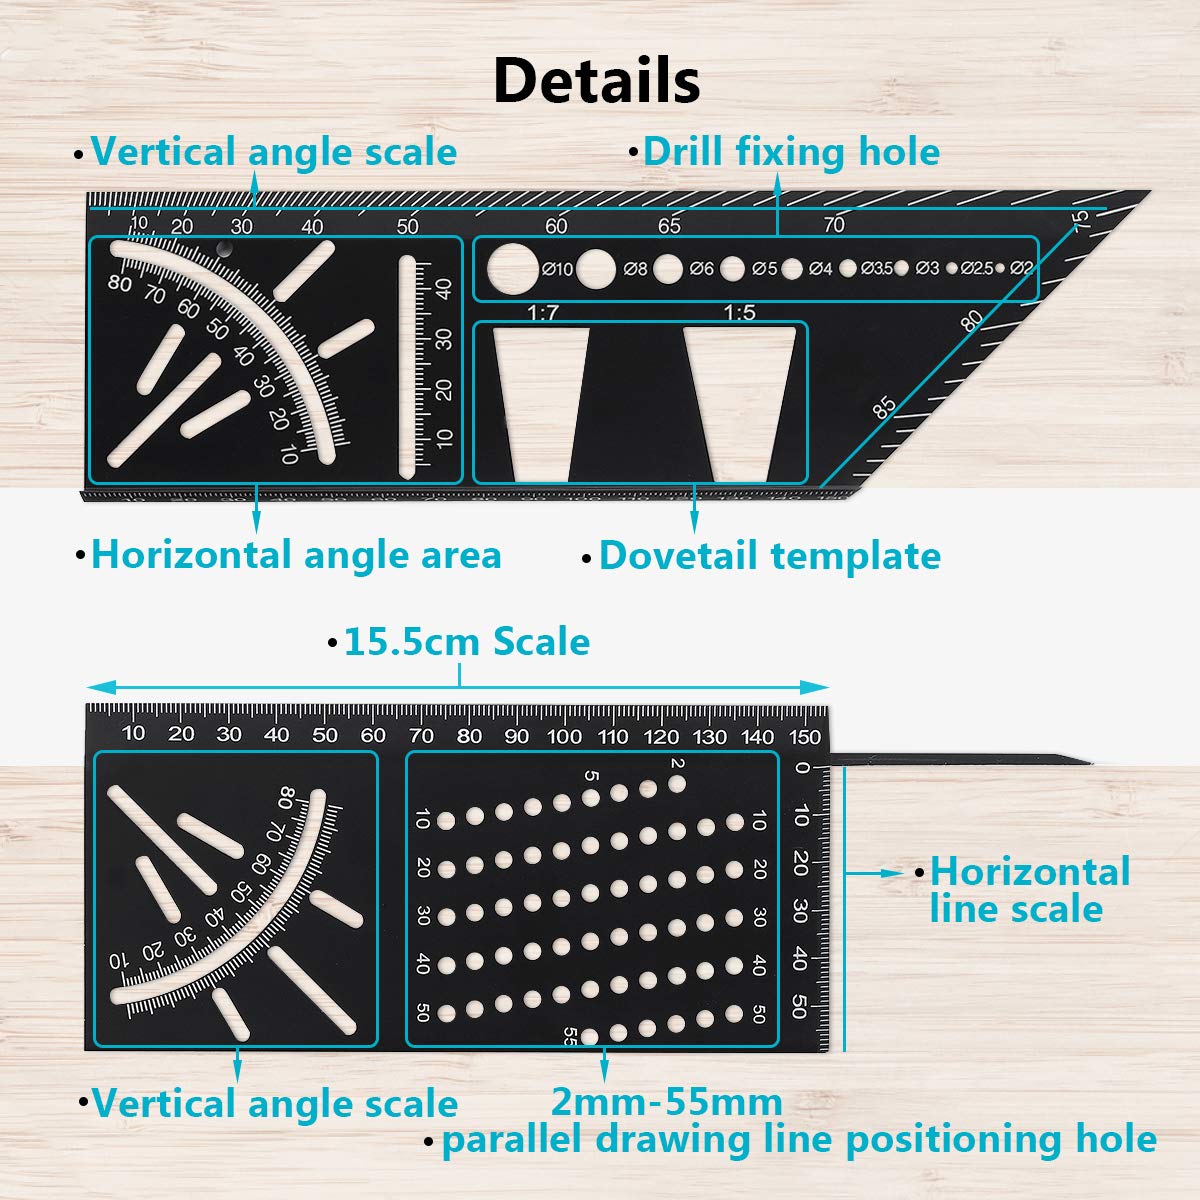 19-In-1-3D-Multi-Angle-ABS-Measuring-Ruler-Mitre-Angle-Measuring-Template-Tool-Mutifunction-Gauge-Wo-1830007-5